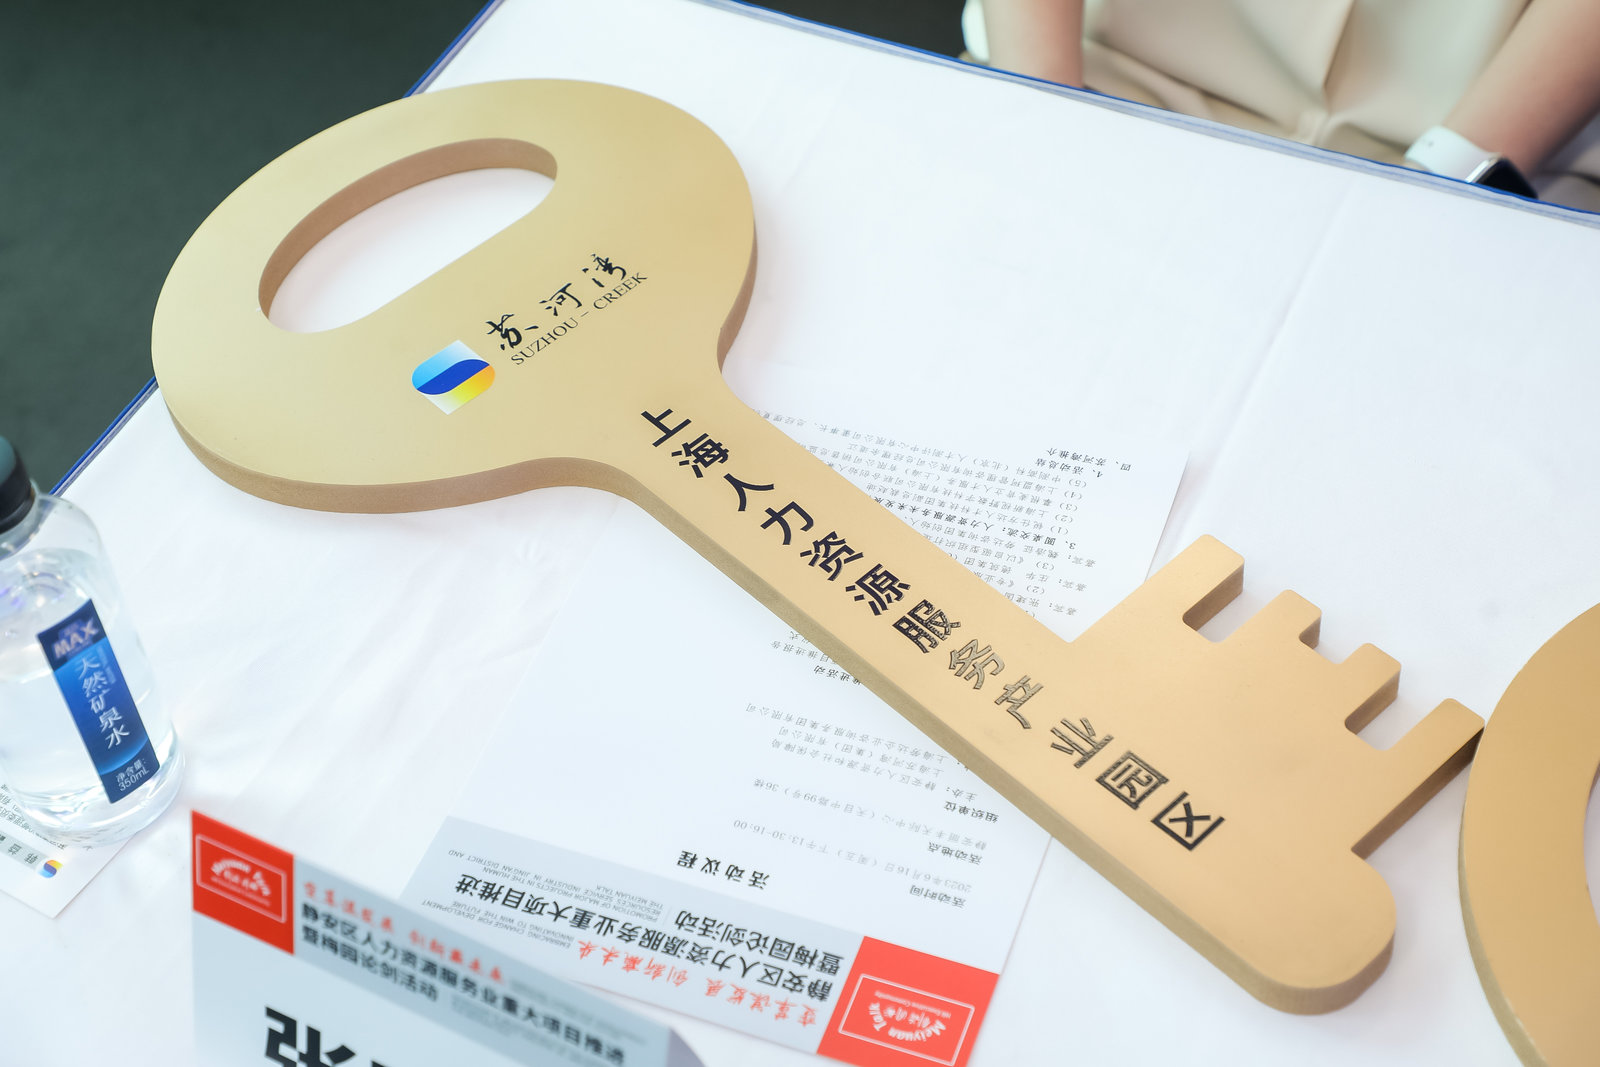 The tax revenue in the first five months of this year increased by 14.4% year-on-year, and the human resources service industry in Jing'an District continues to lead the way